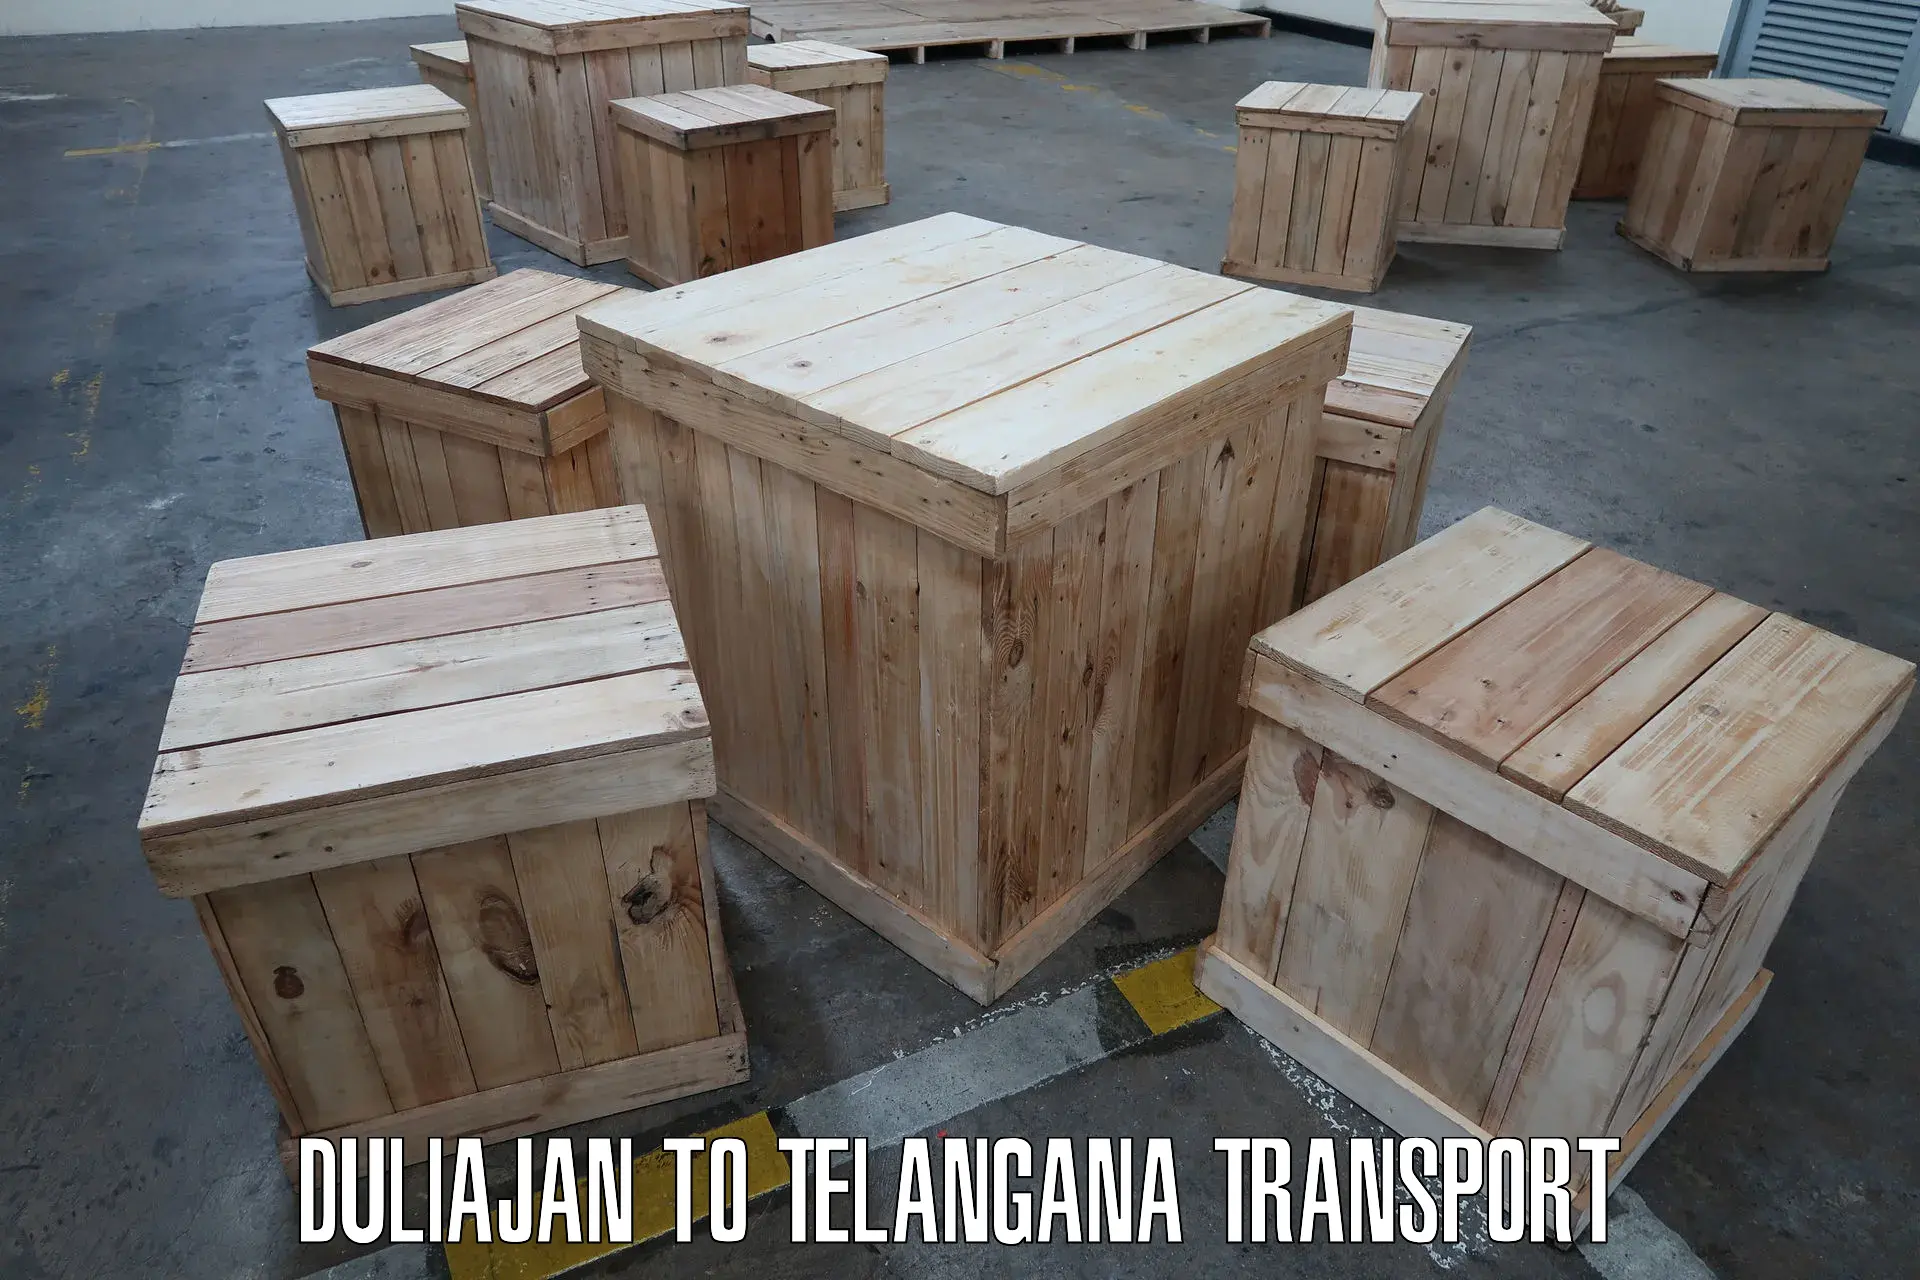 Air freight transport services in Duliajan to Manneguda